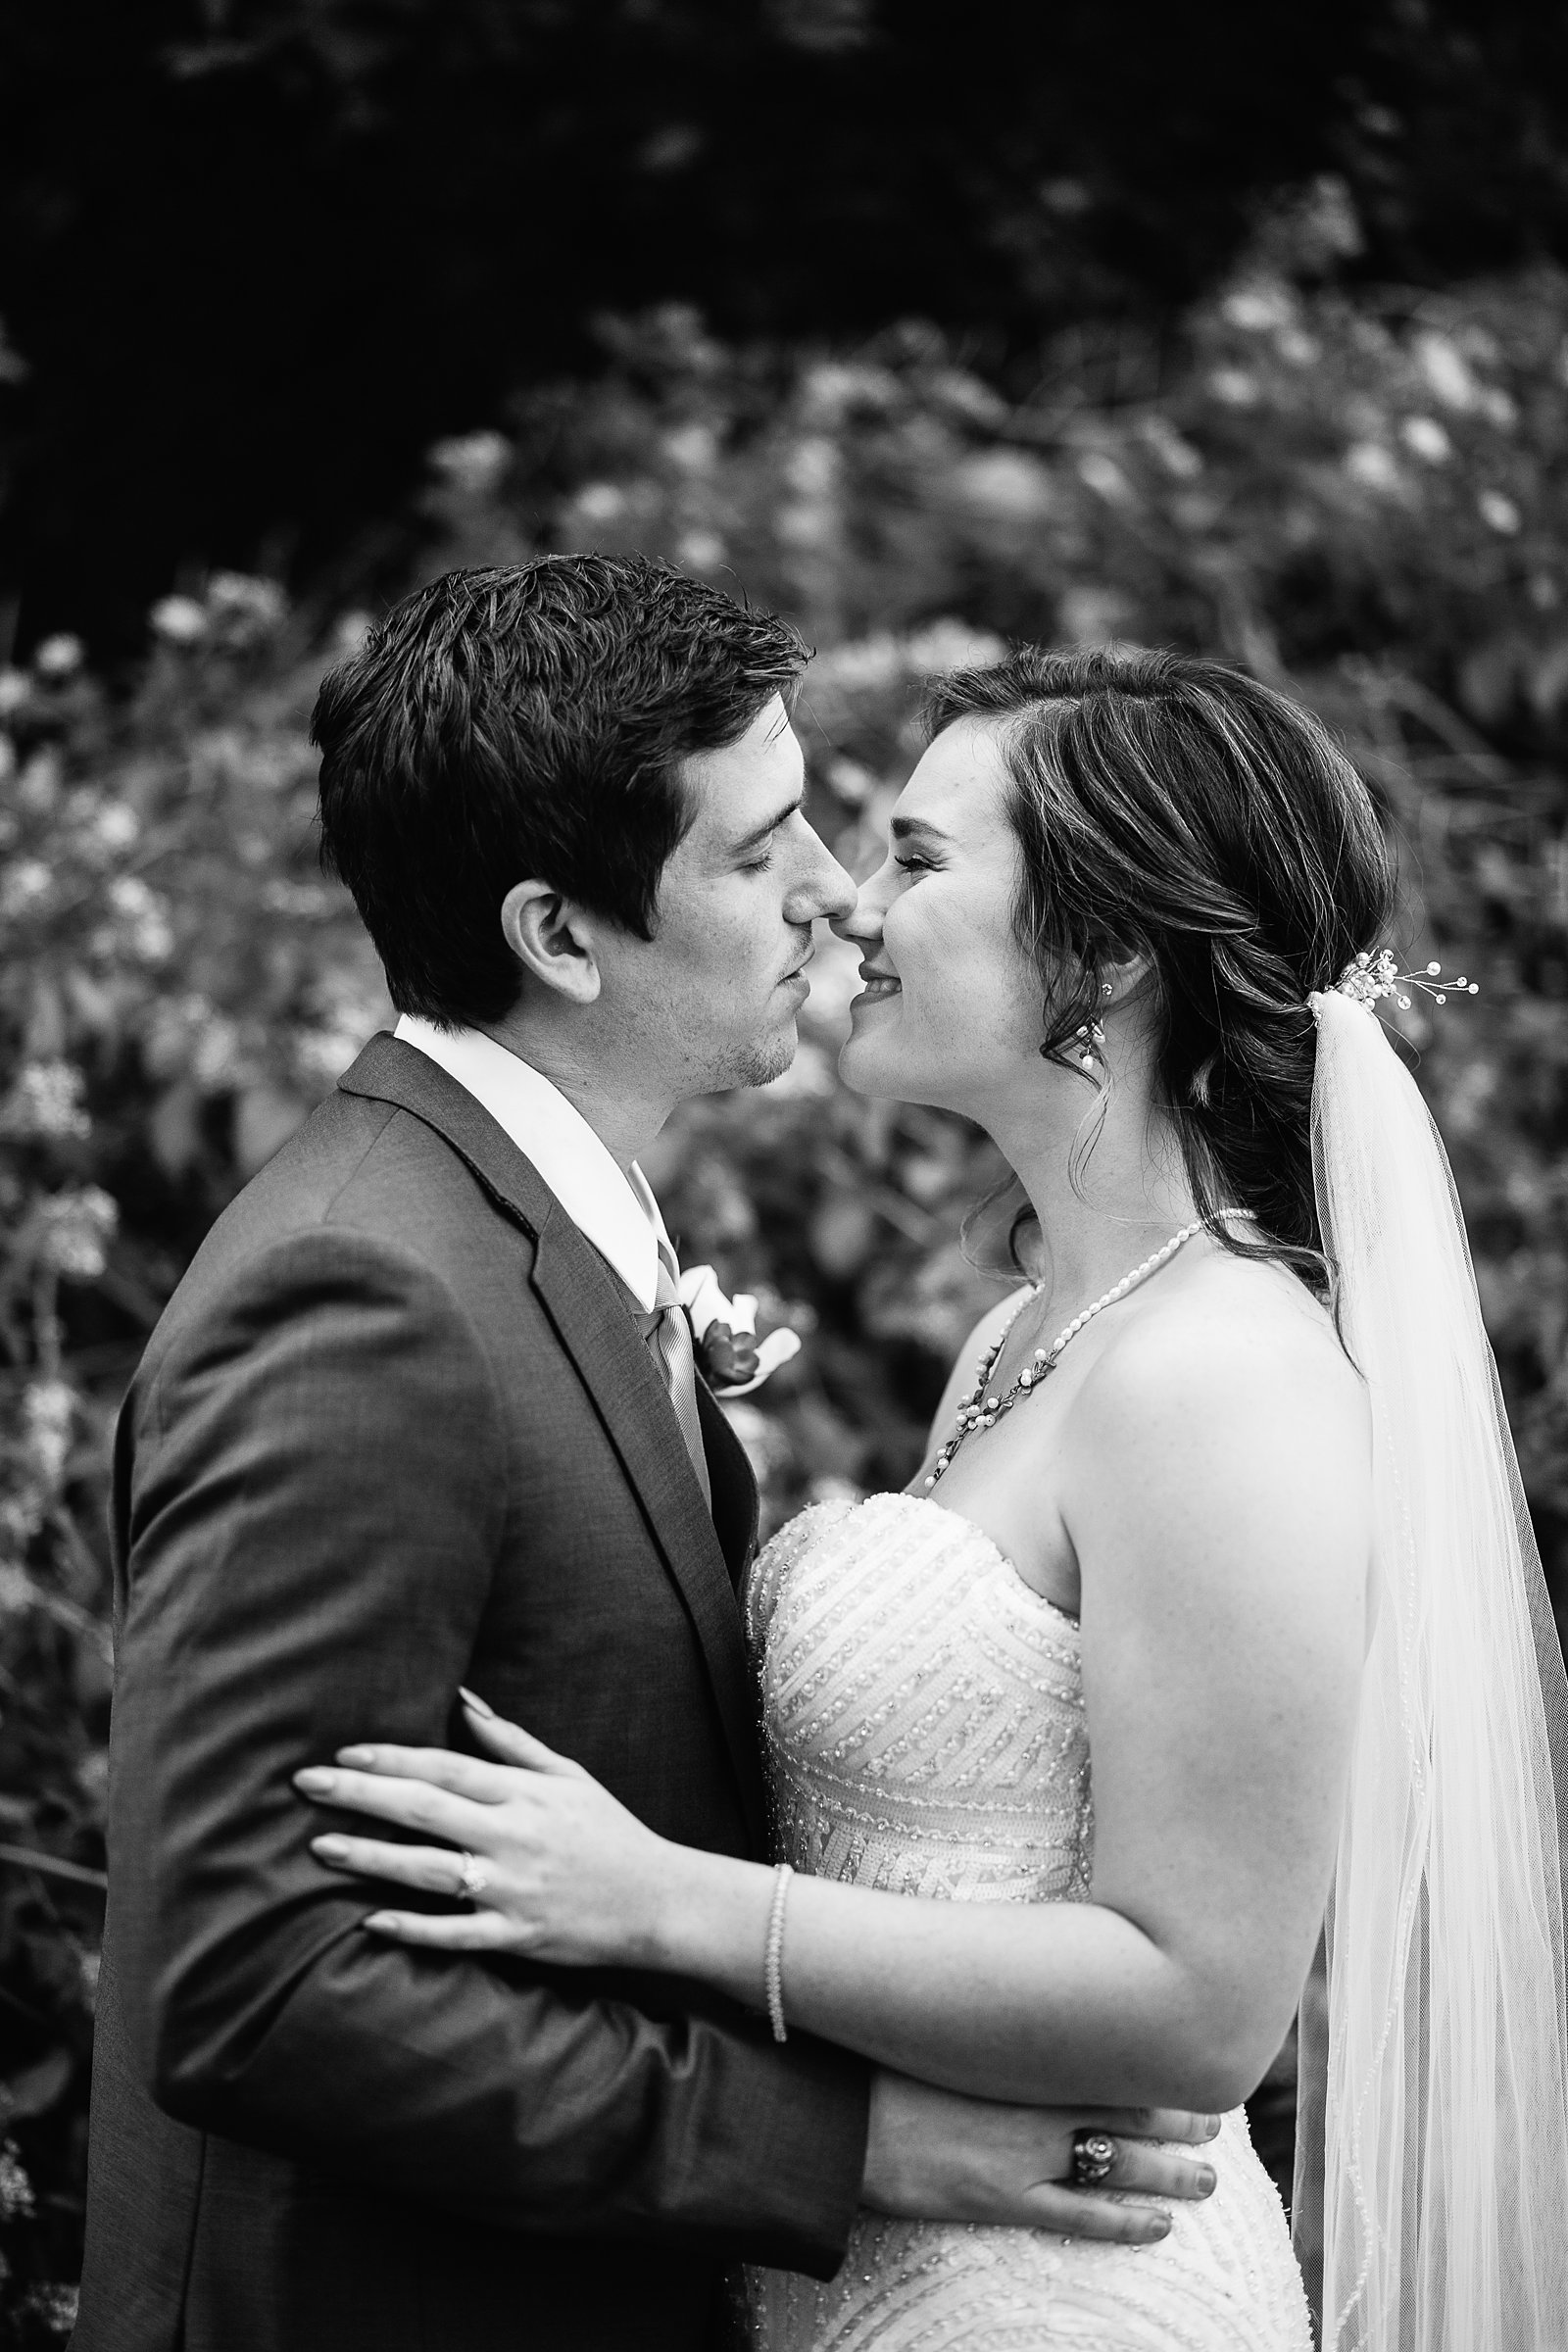 Bride and Groom share a kiss during their The Wright House wedding by Mesa wedding photographer PMA Photography.